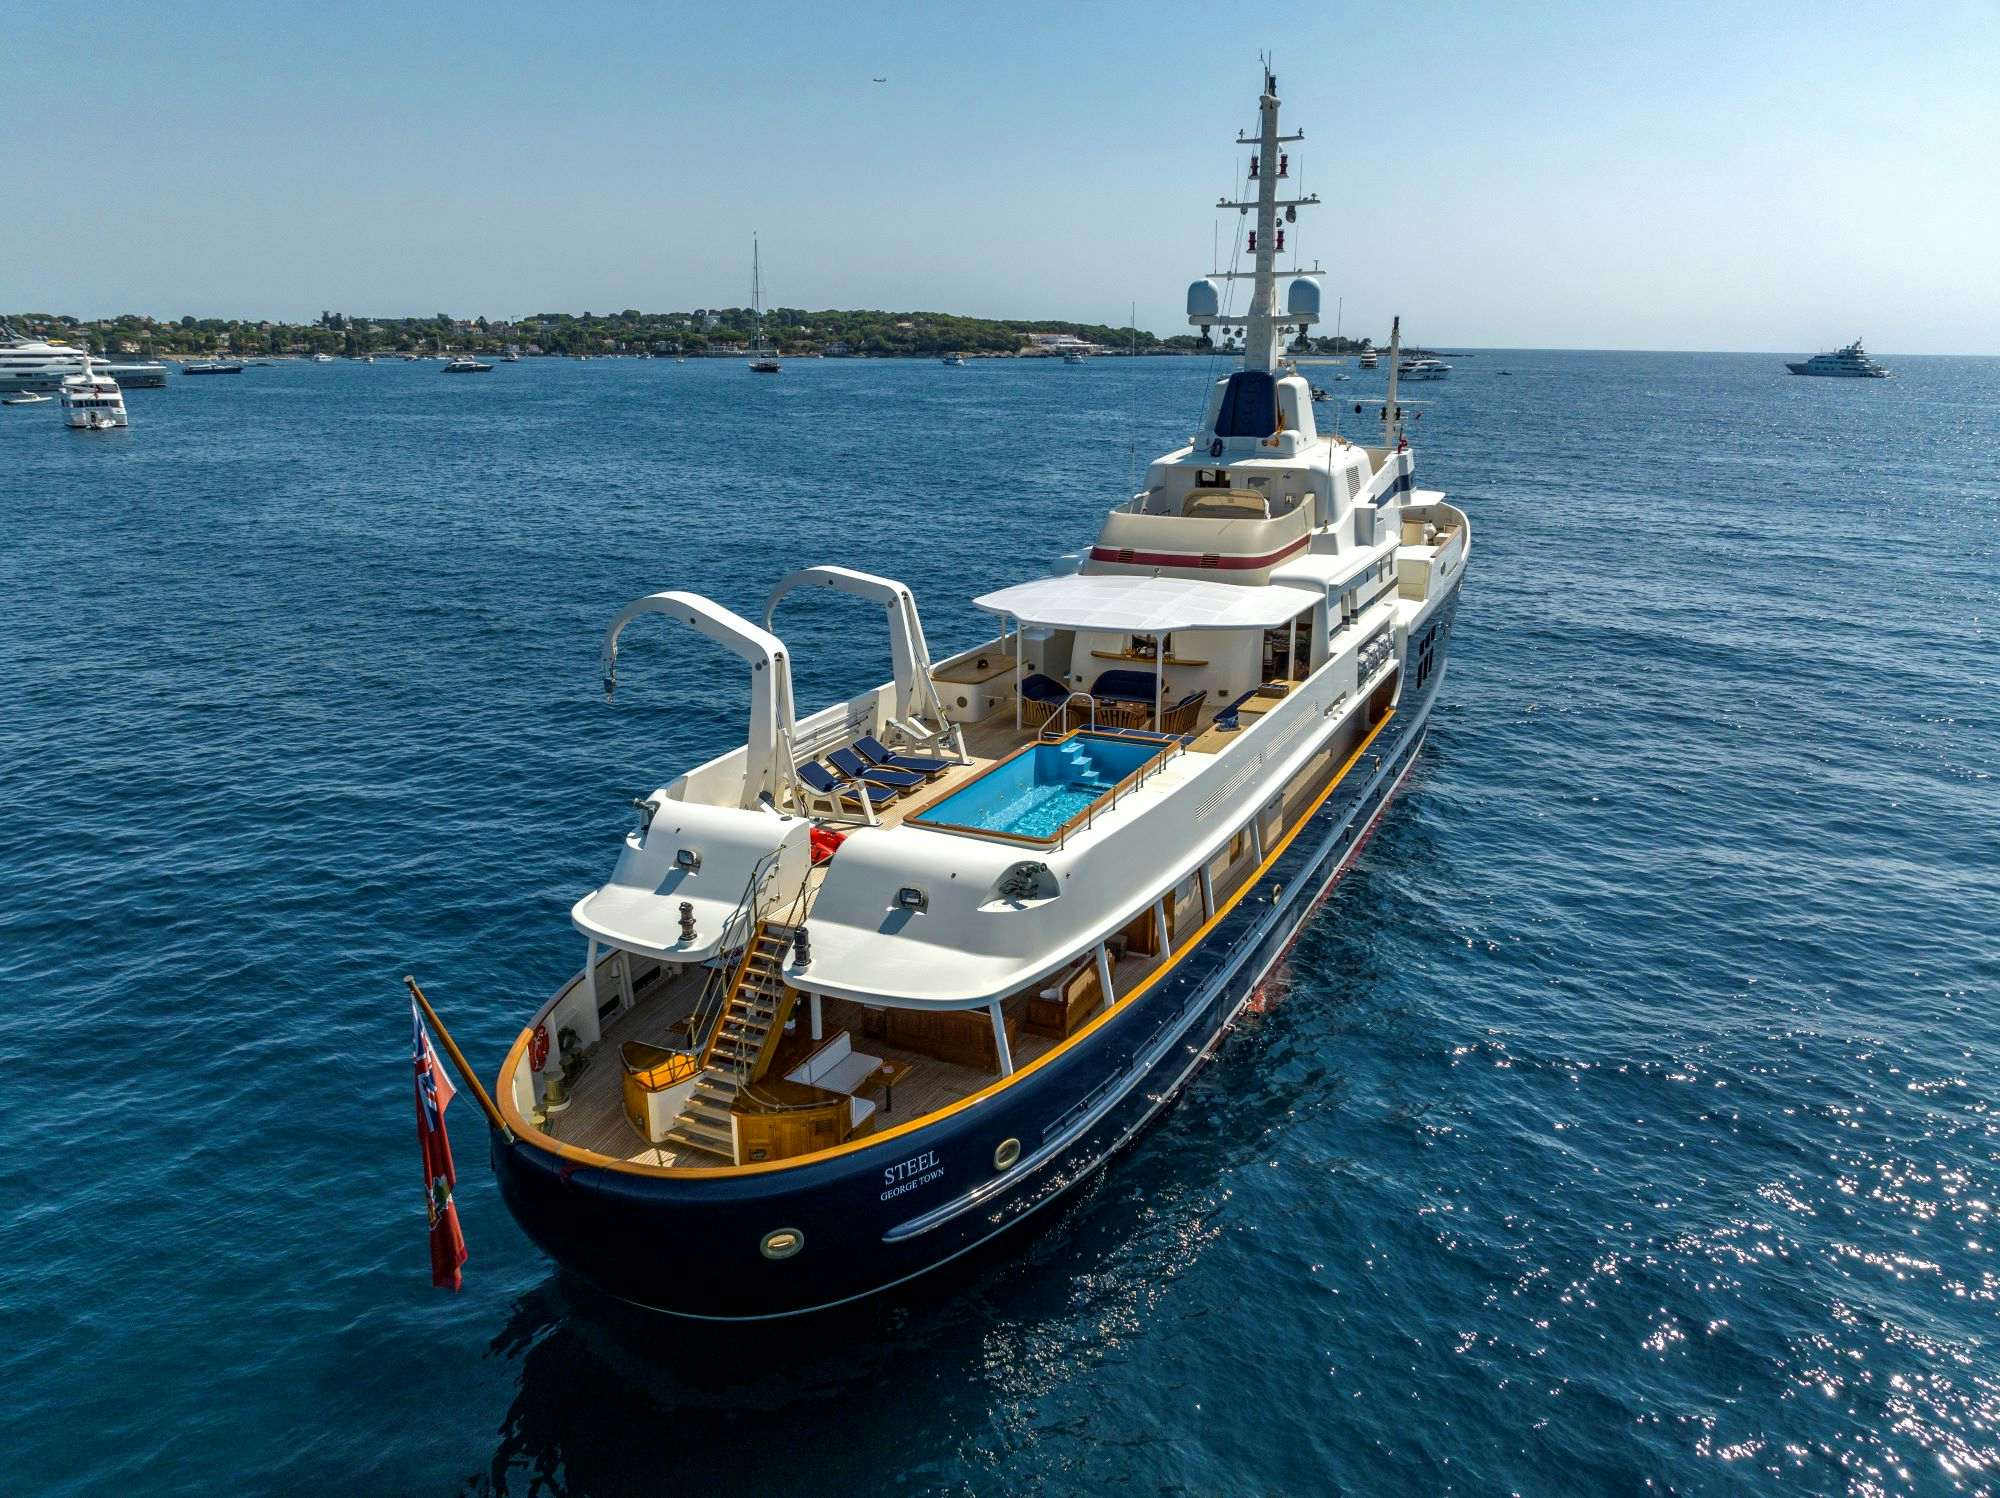 STEEL Yacht for Charter, 180' 1 (54.9m) 2009 7 Cabins Pendennis